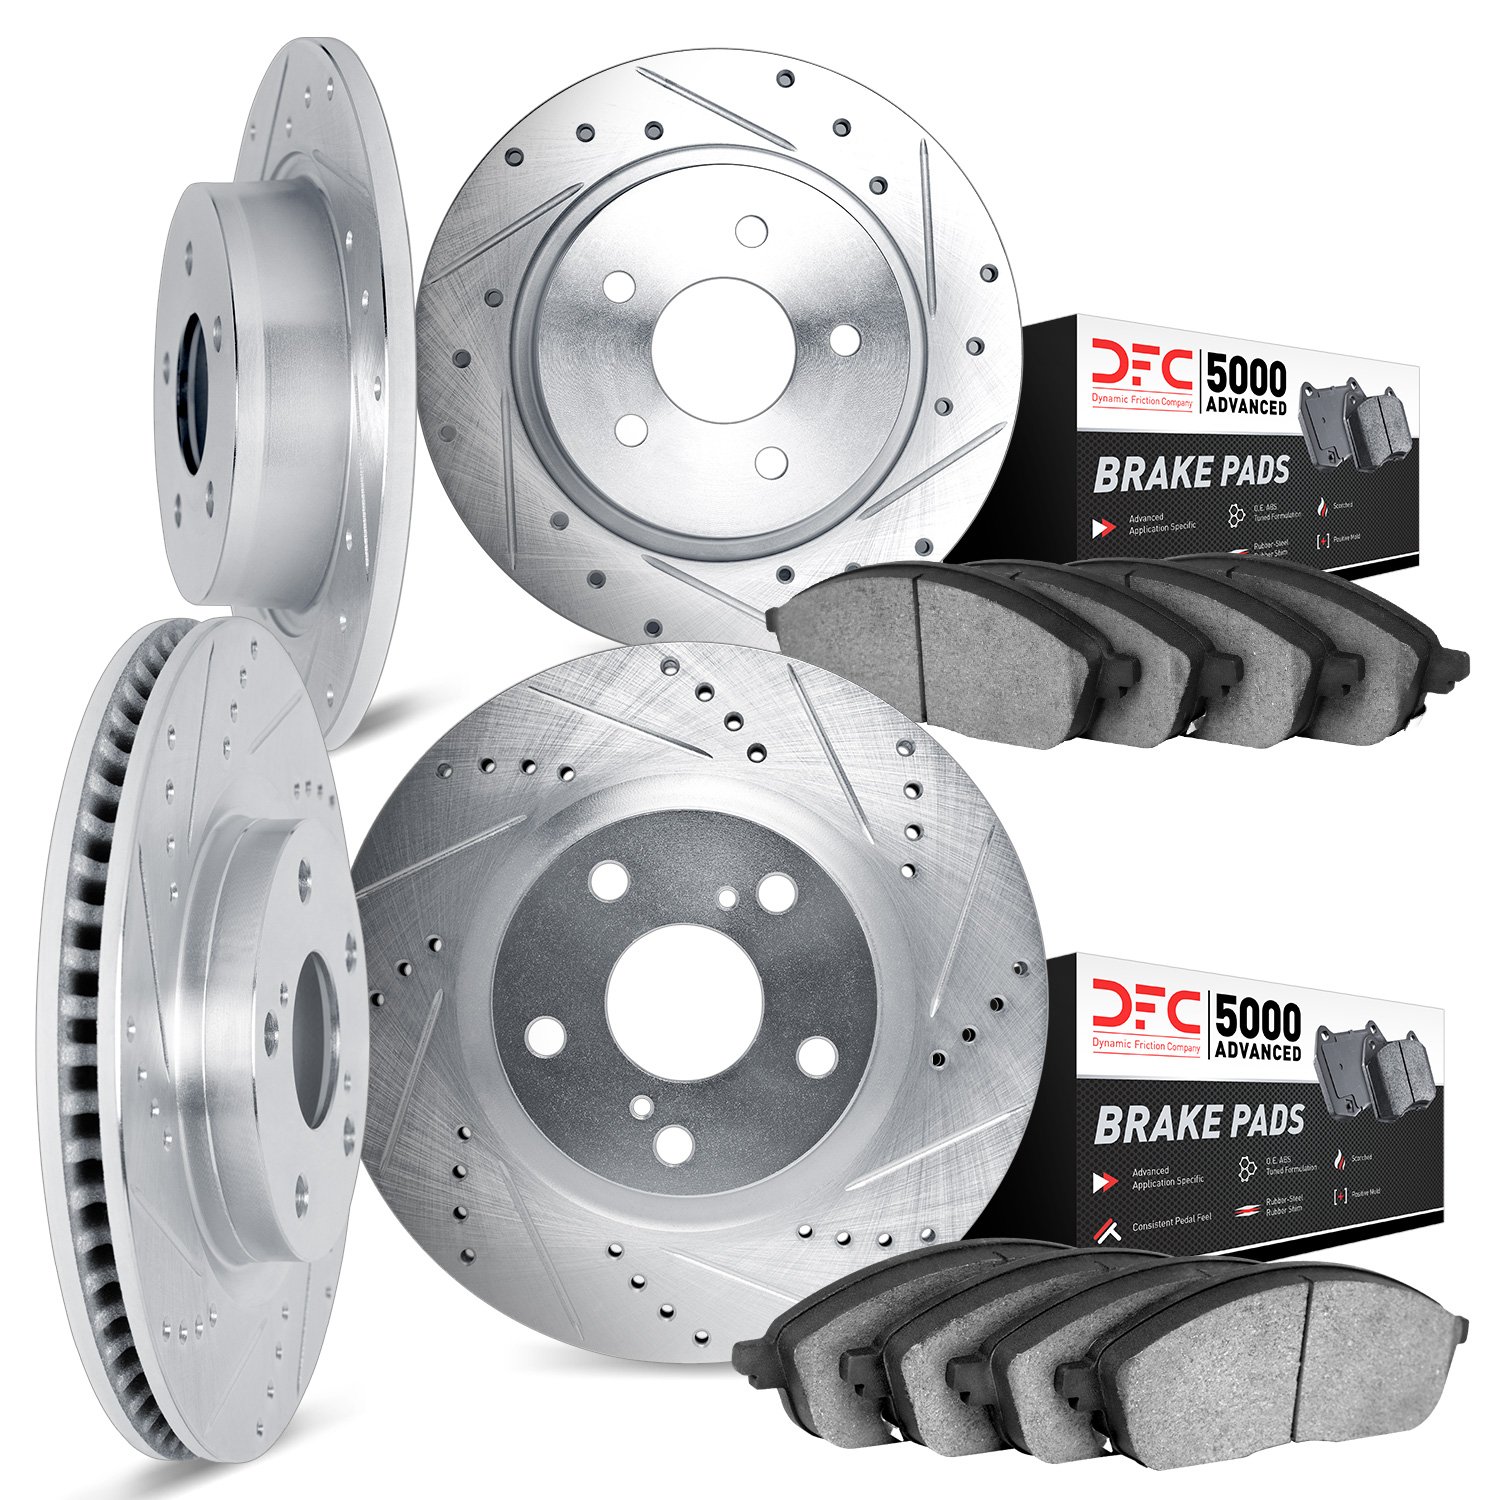 7504-54288 Drilled/Slotted Brake Rotors w/5000 Advanced Brake Pads Kit [Silver], 2009-2010 Ford/Lincoln/Mercury/Mazda, Position: